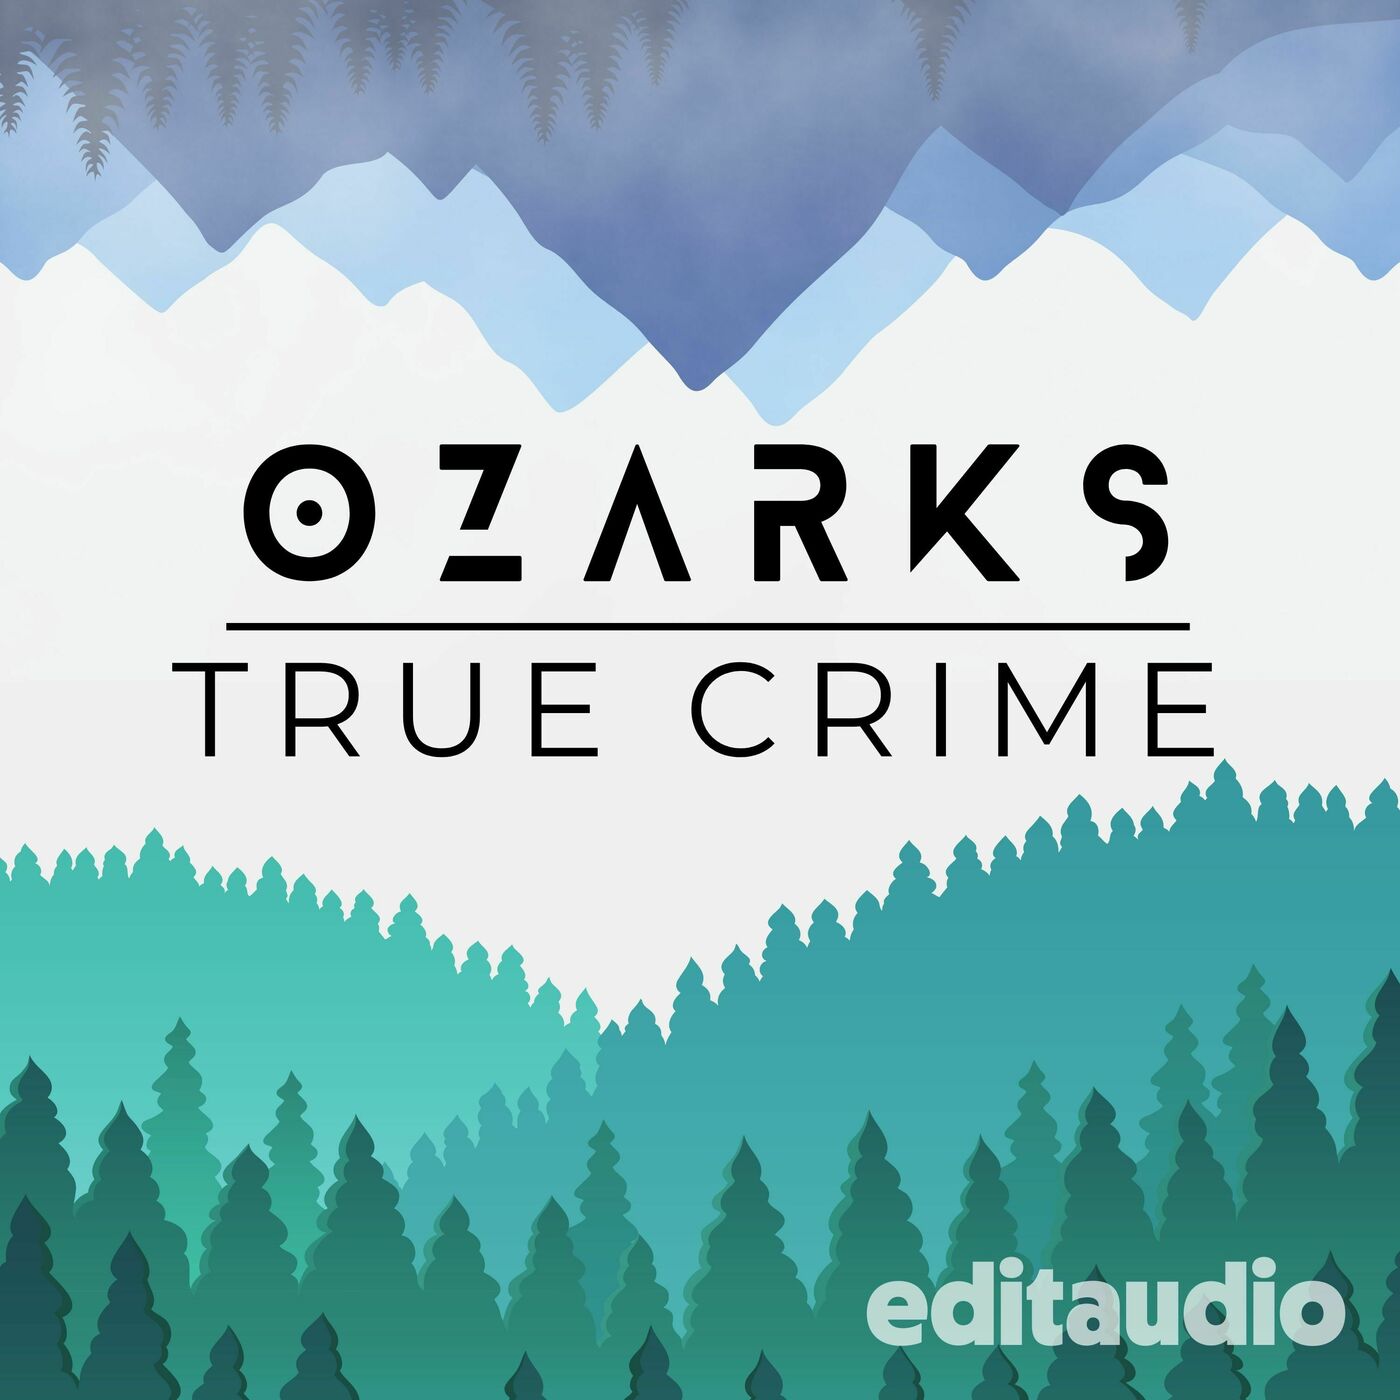 The Making of Ozarks True Crime: Listener Questions Answered!